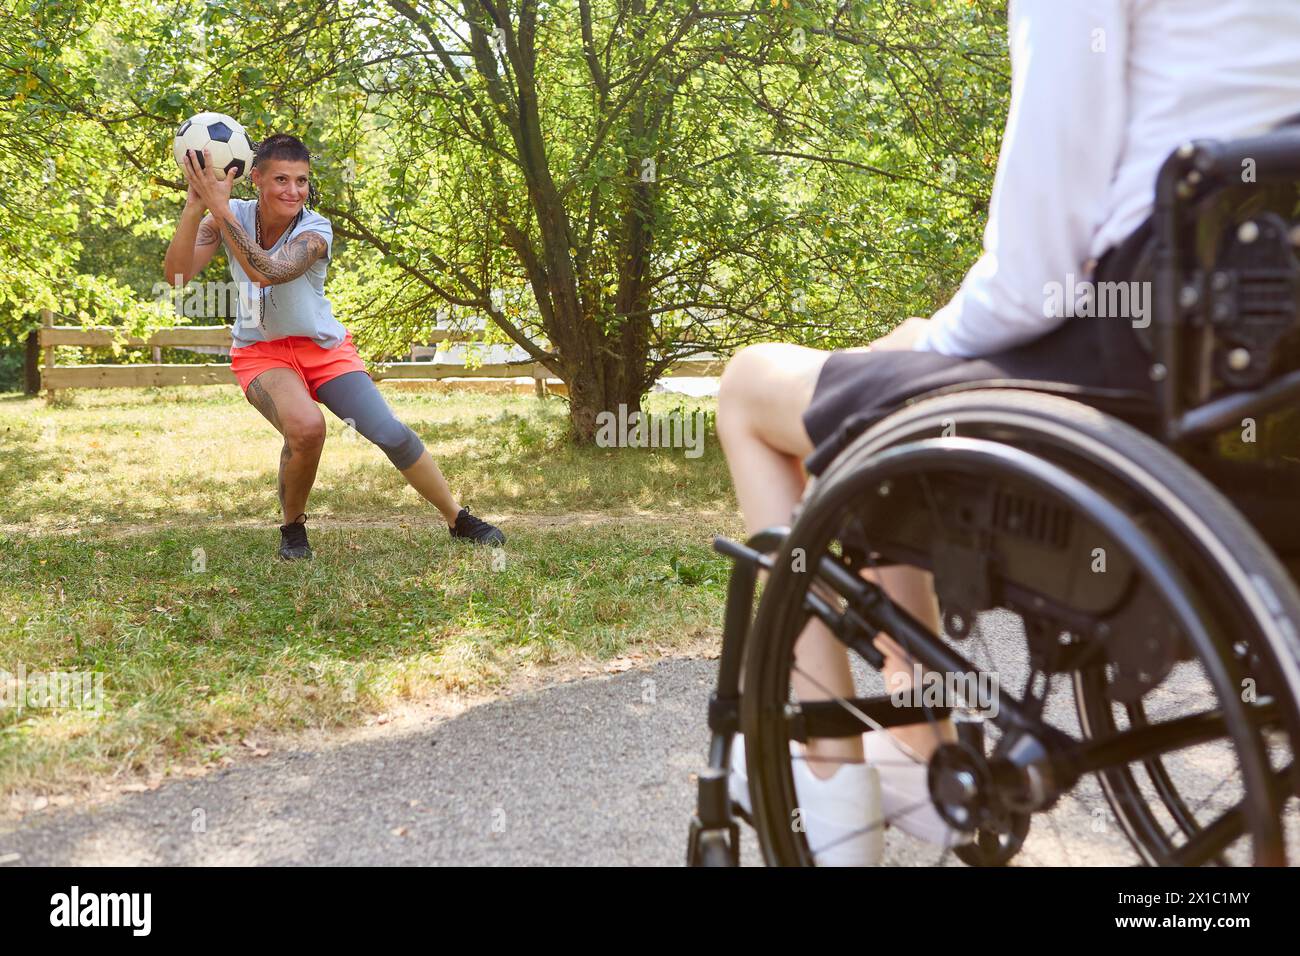 A person with a disability in a wheelchair and an able-bodied person enjoying soccer together outdoors, depicting inclusion and accessibility in sport Stock Photo